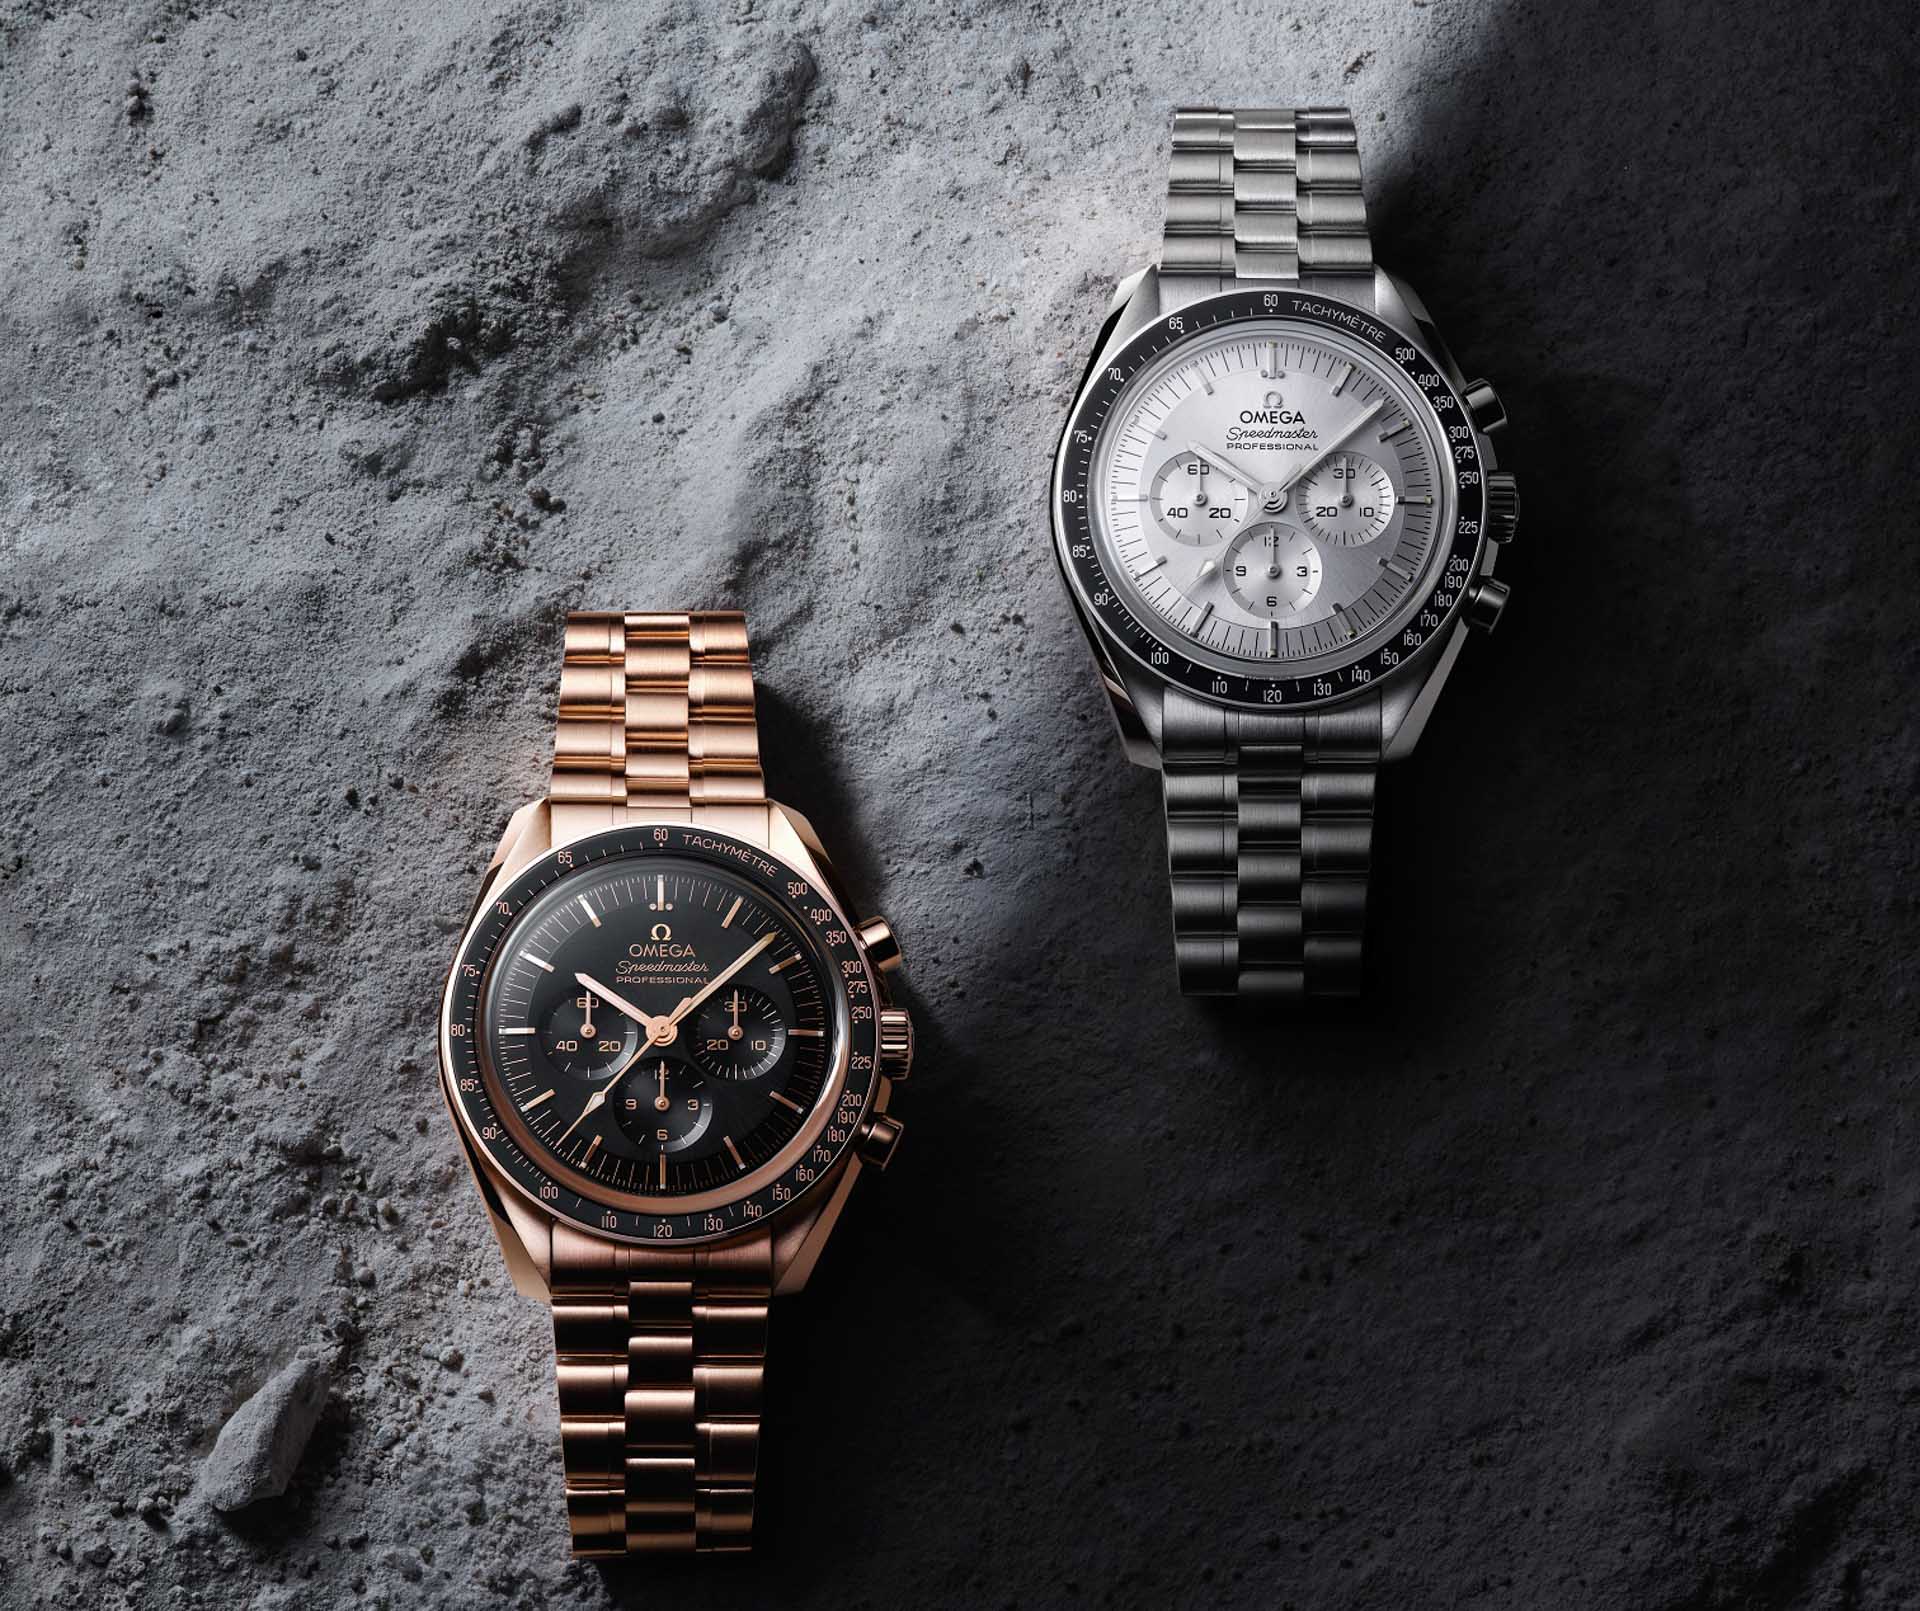 new omega releases